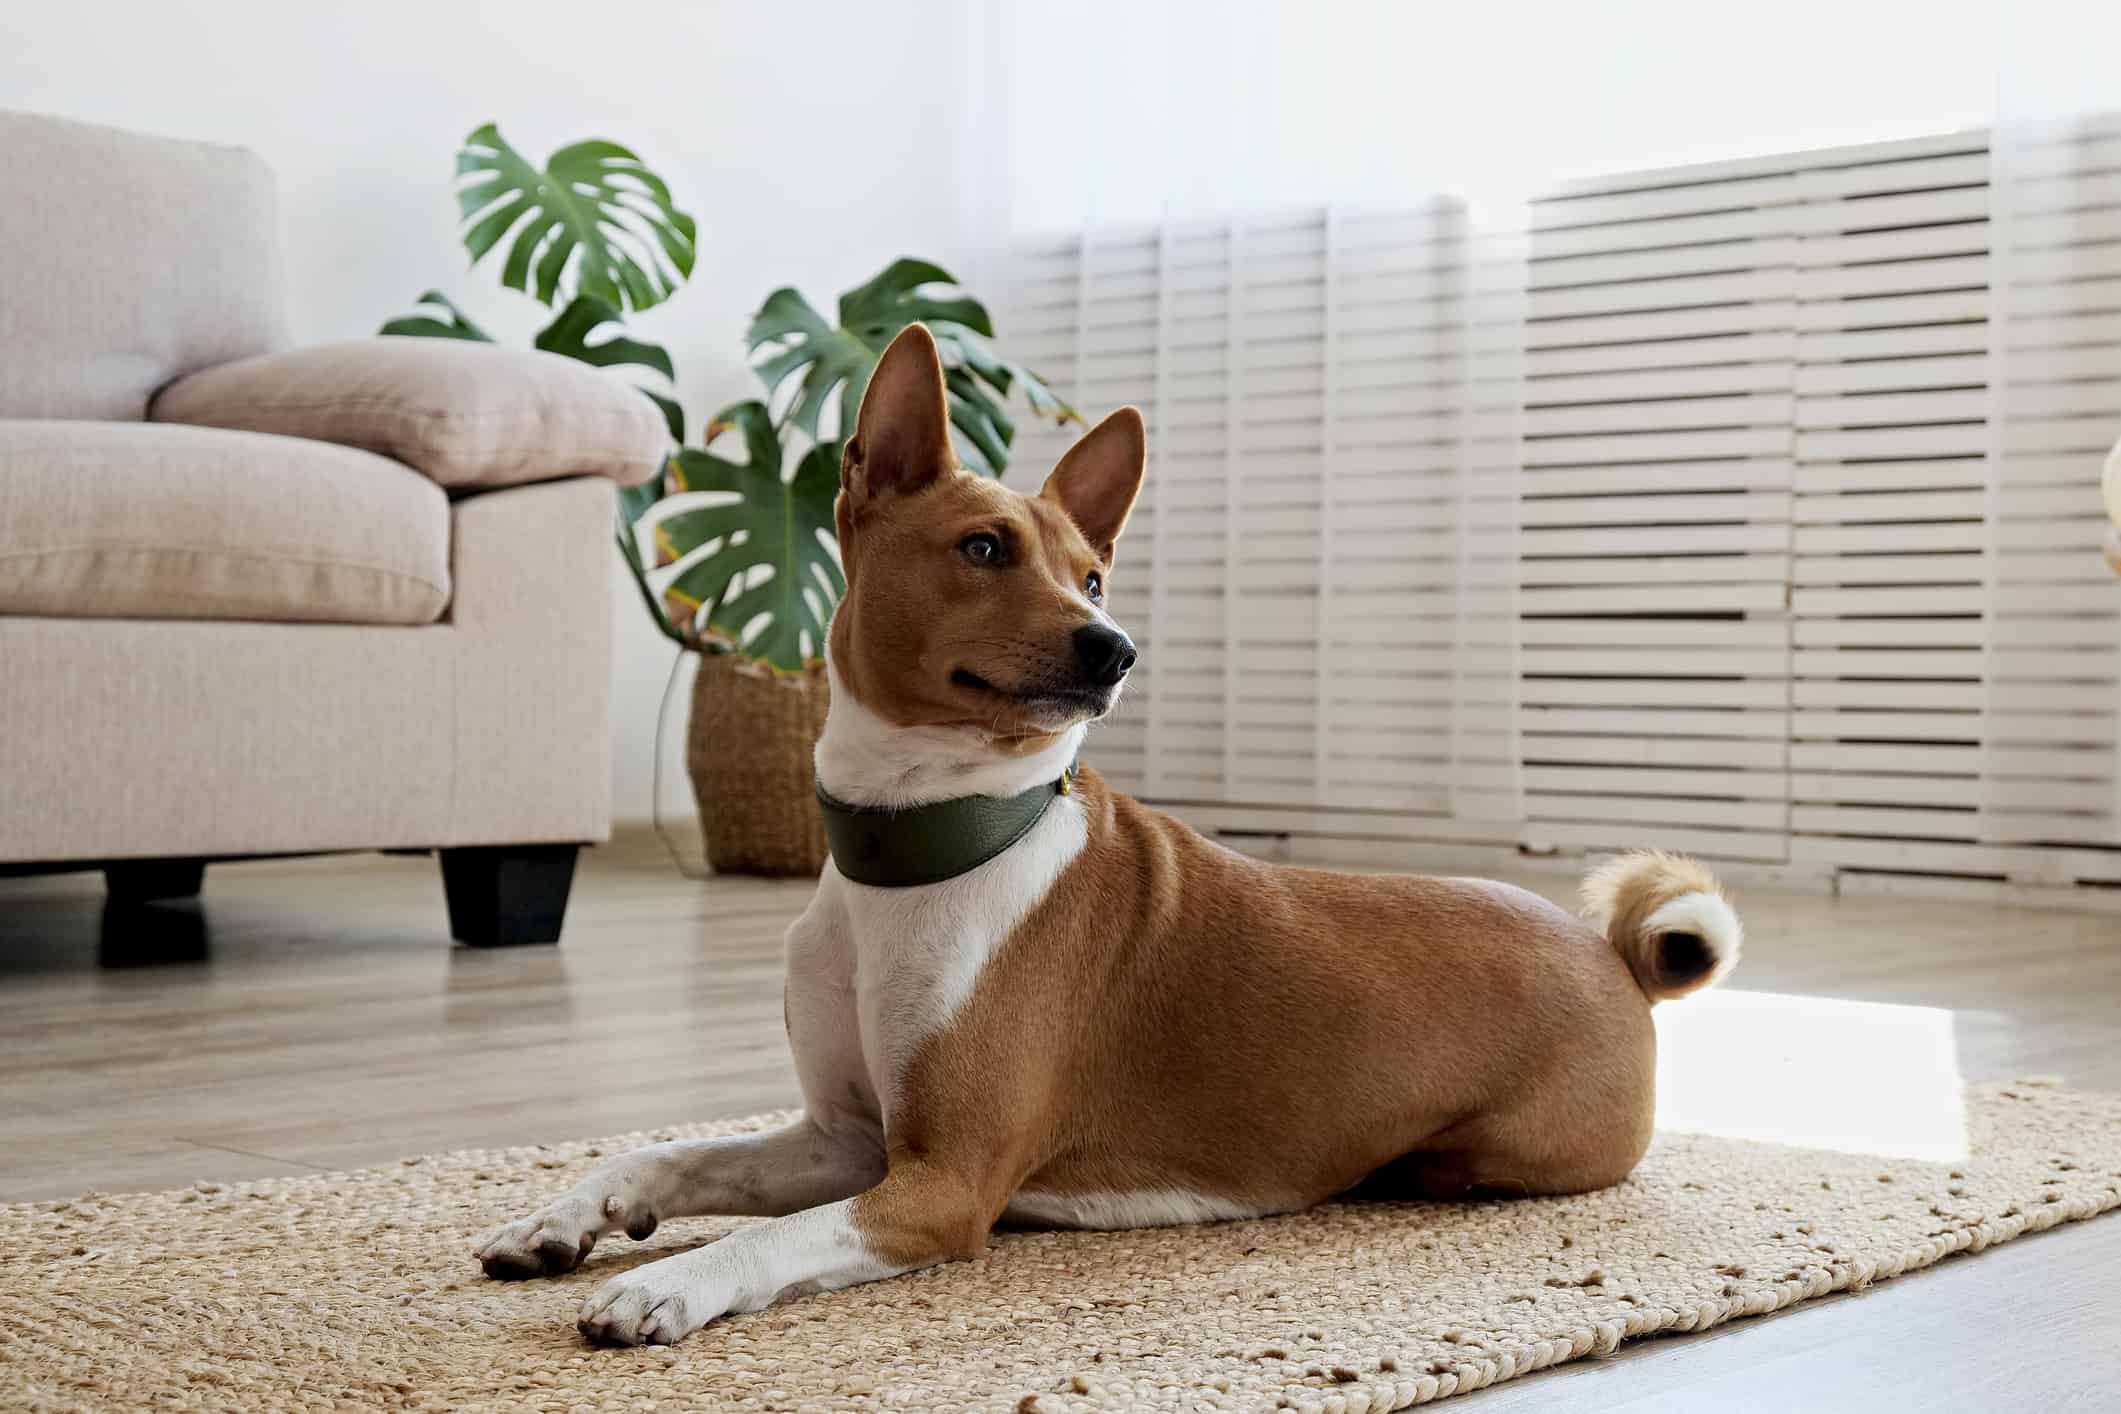 Cute Basenji dog with big ears laying on a wicker rug. Small adorable doggy with red and white markings resting on a carpet at home. Close up, copy space for text, interior background.